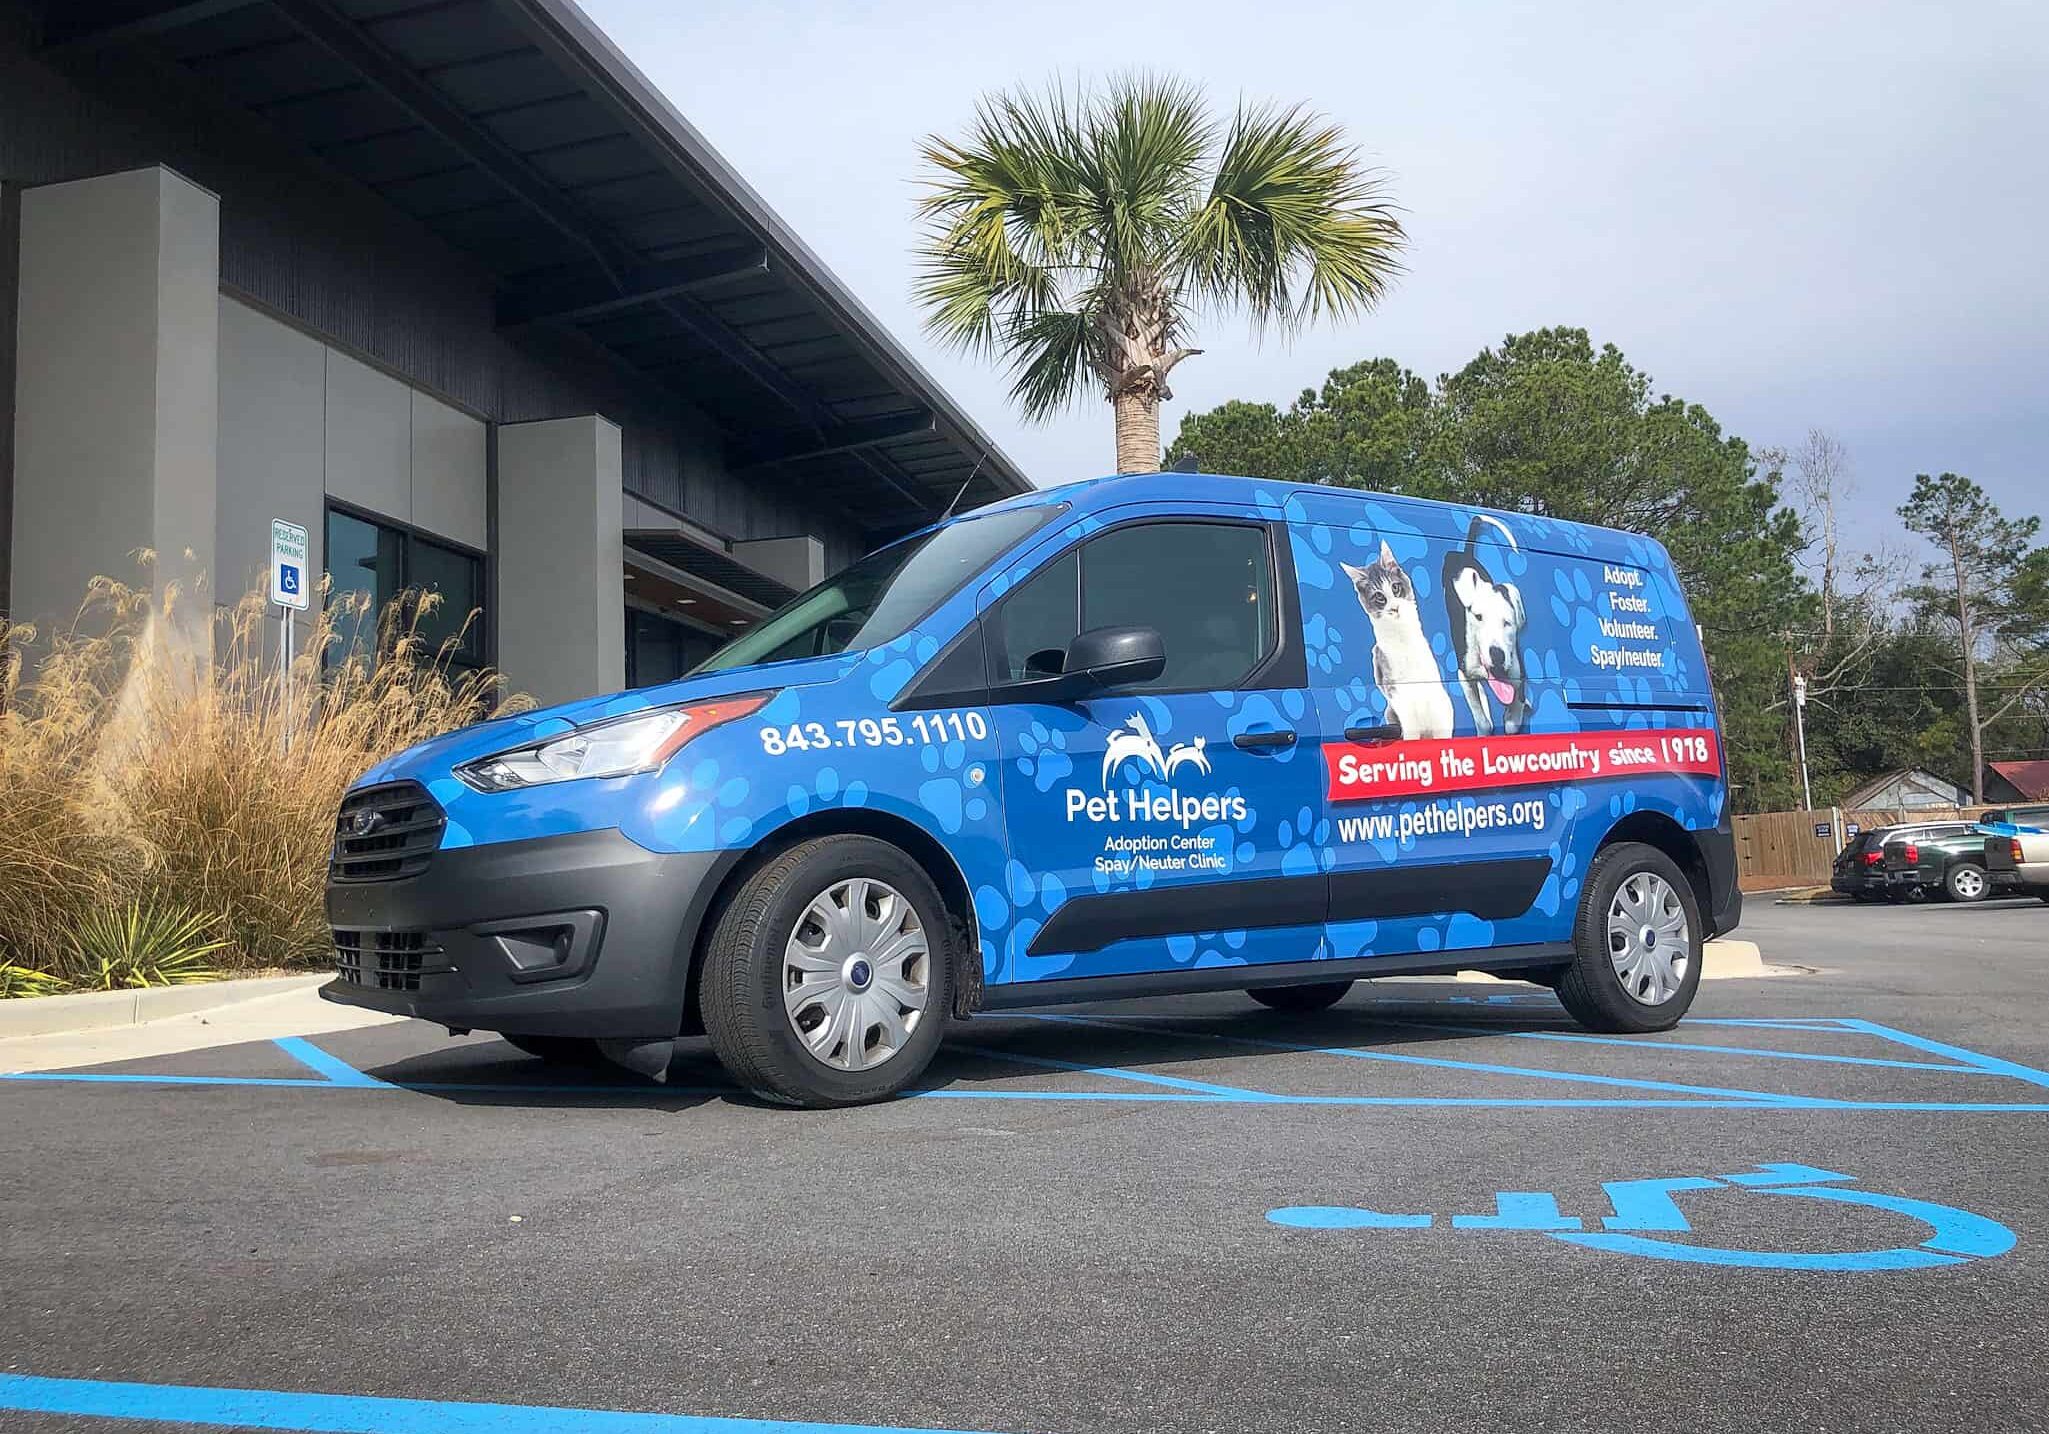 Full Vehicle Wrap for Pet Helpers